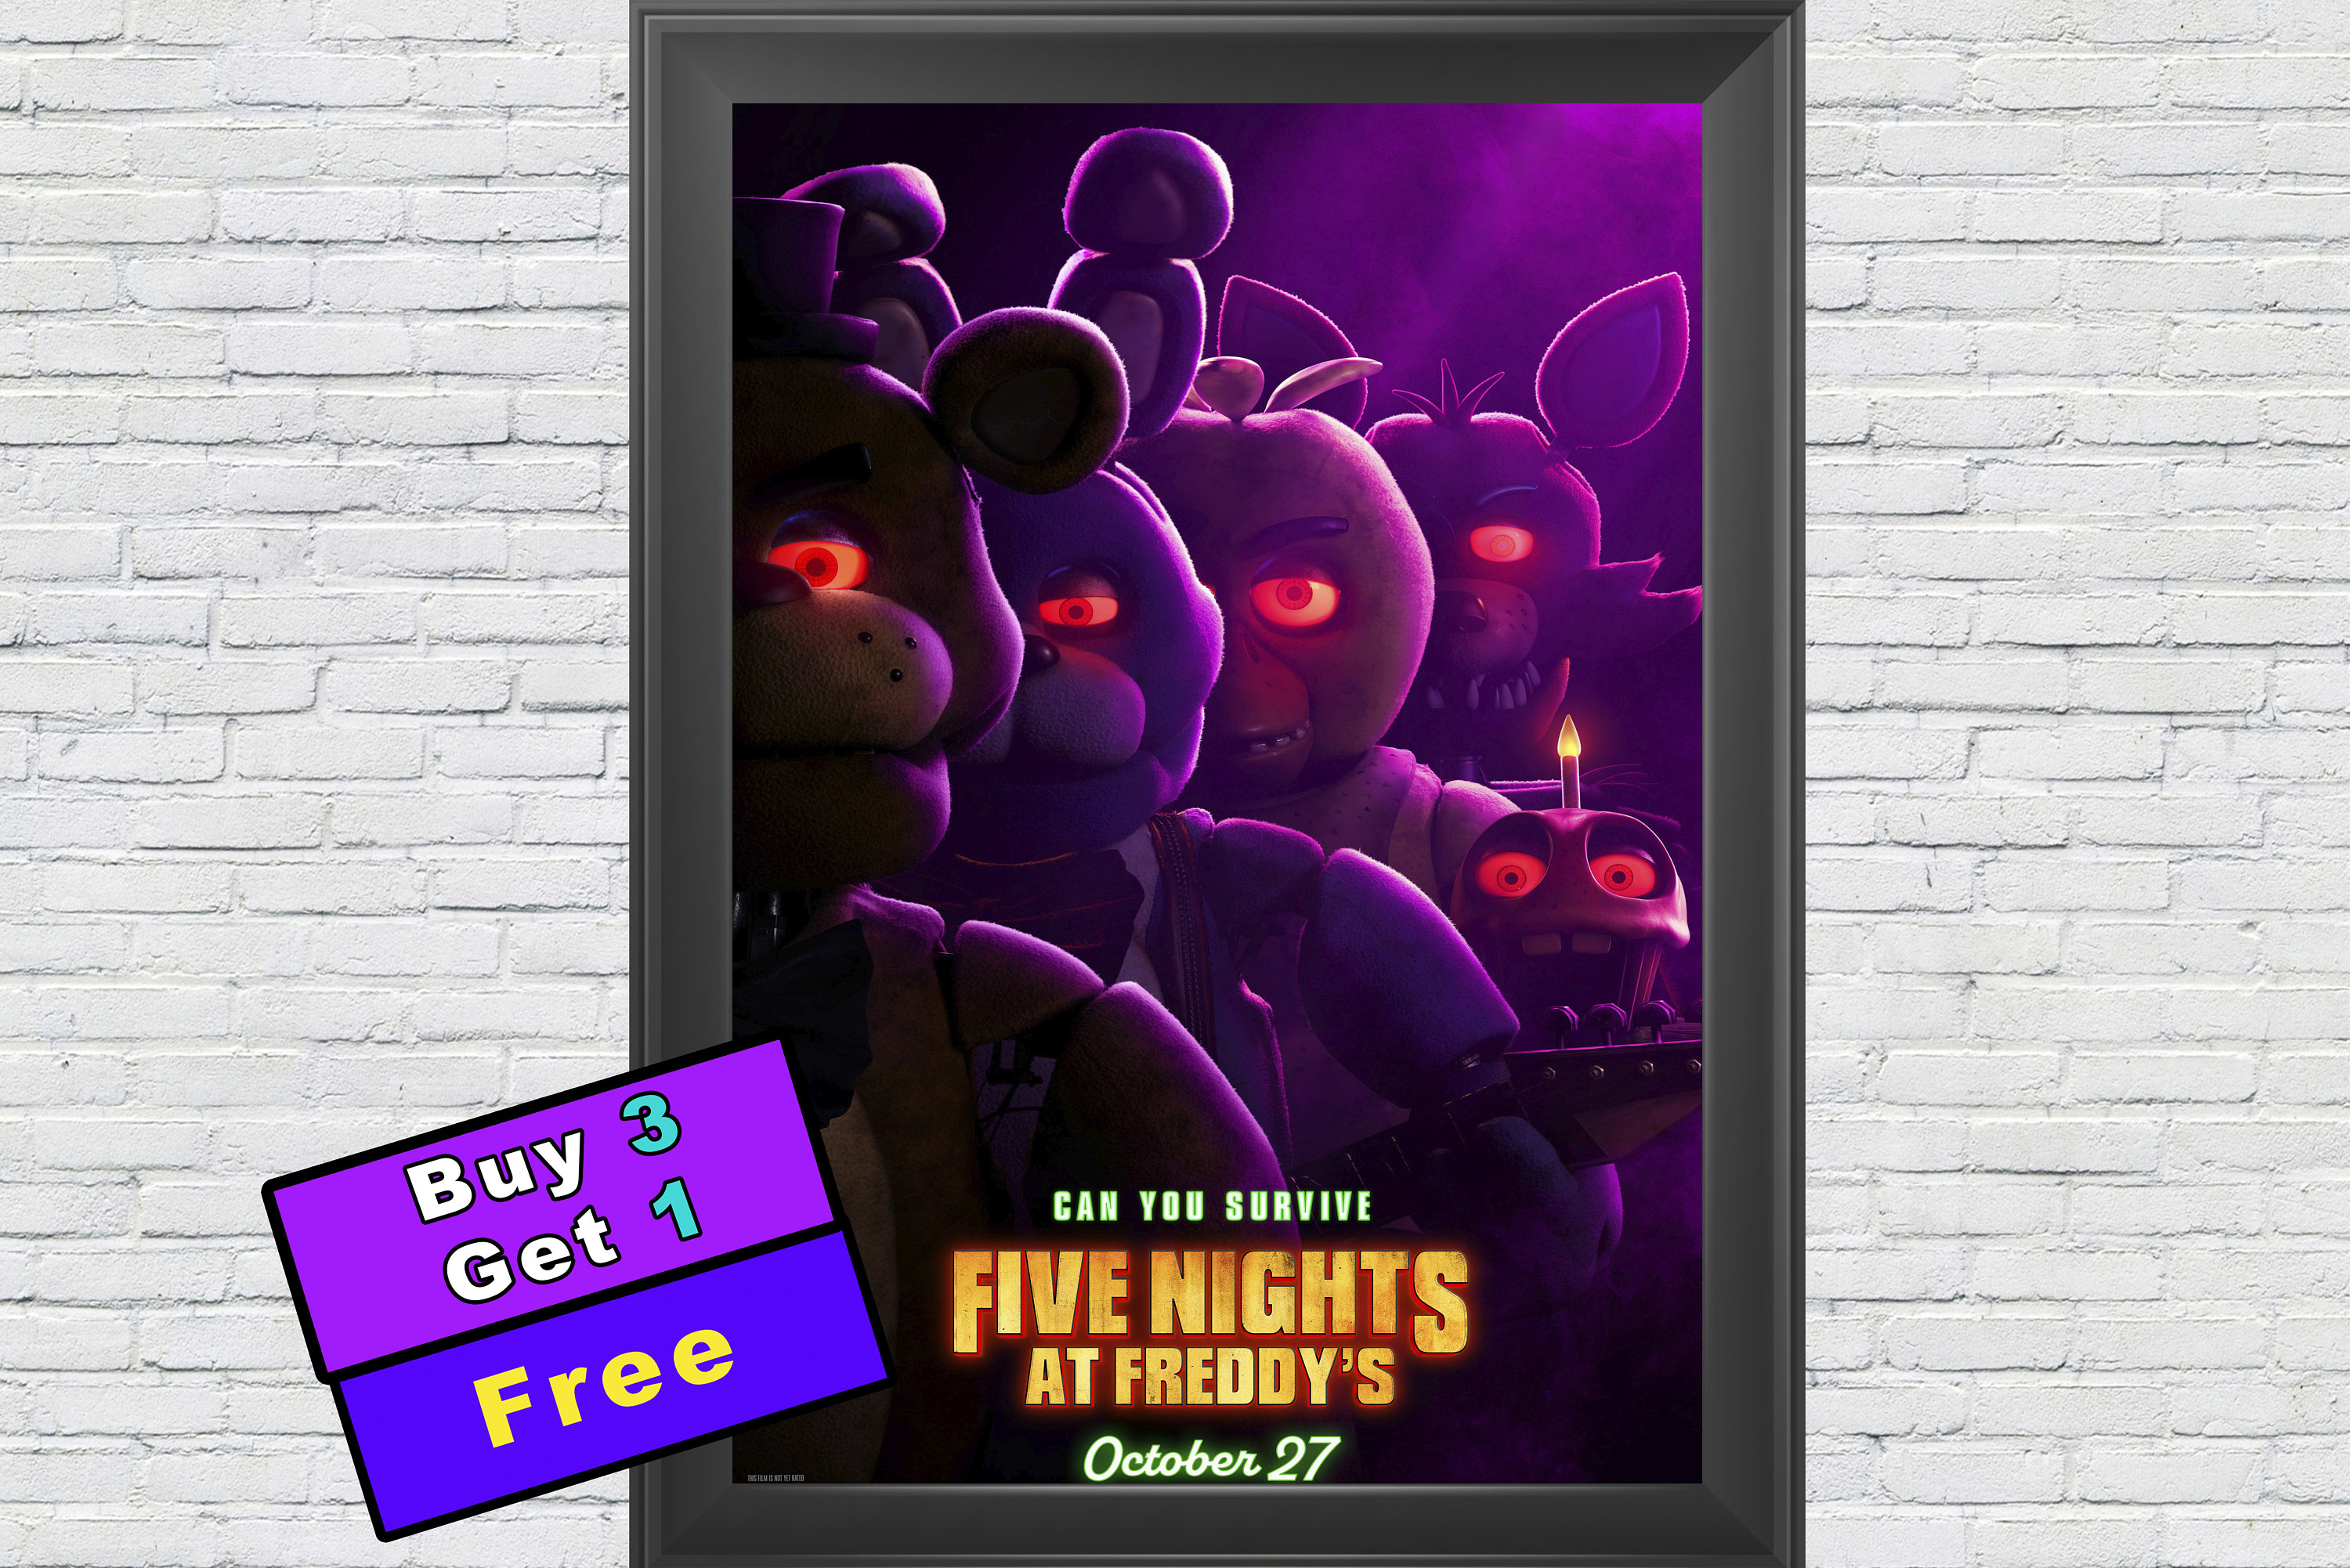 New Poster for 'Five Nights at Freddy's' : r/movies